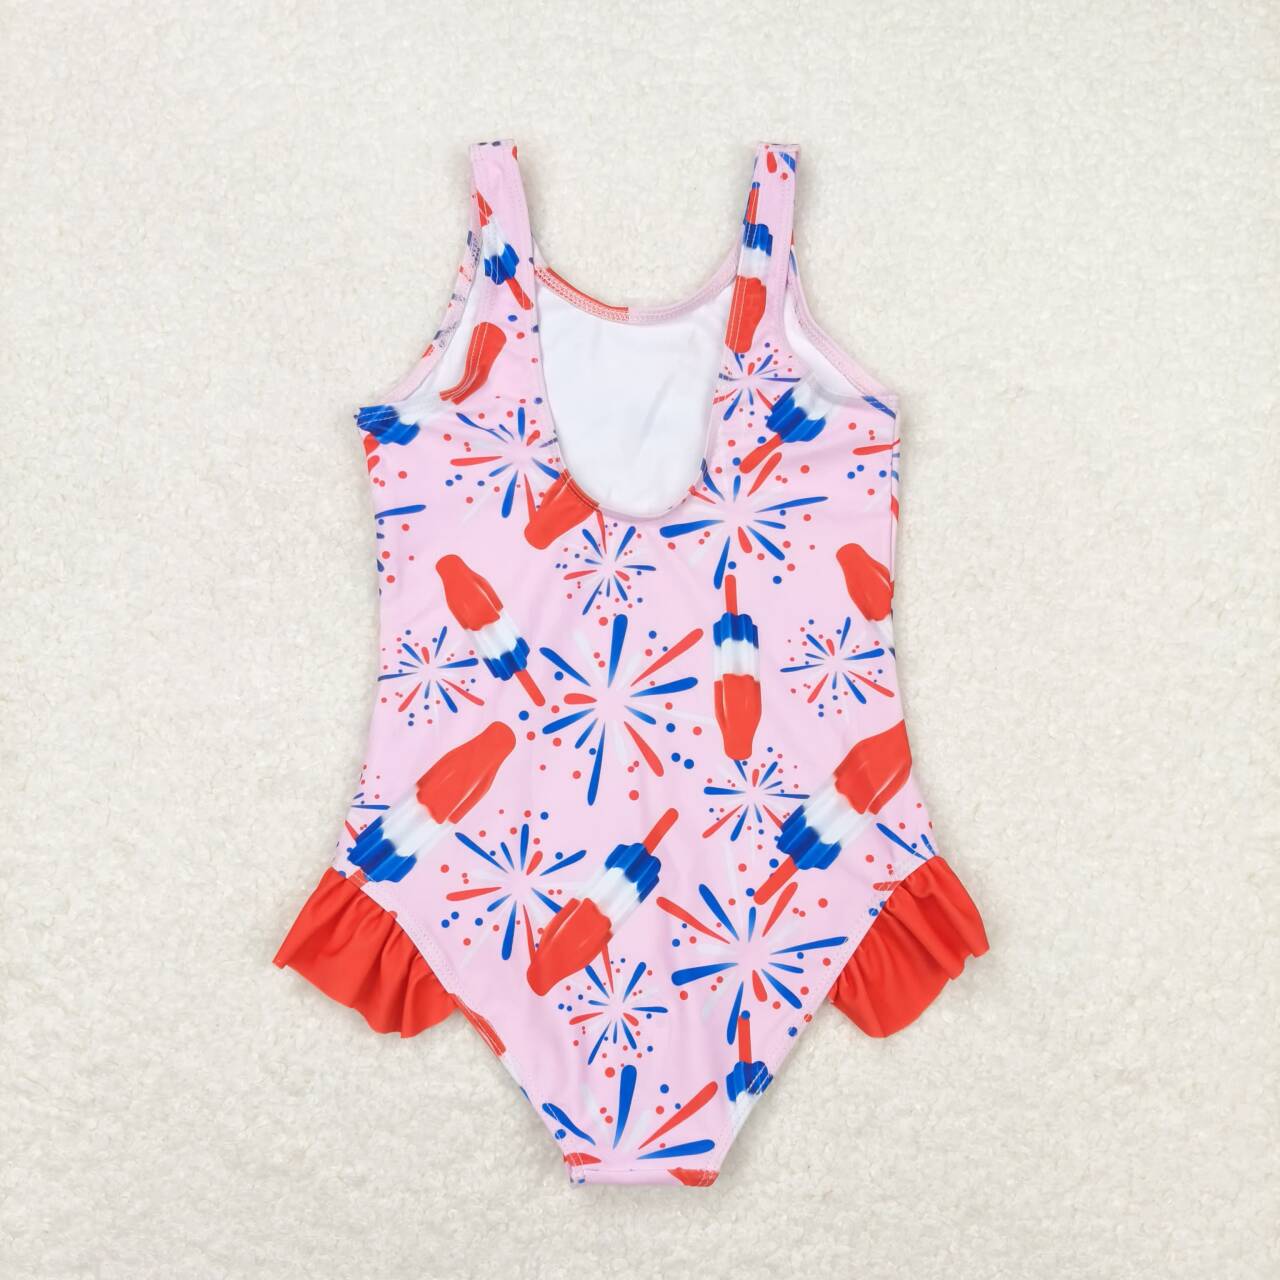 July 4th popsicle one piece bathing suit